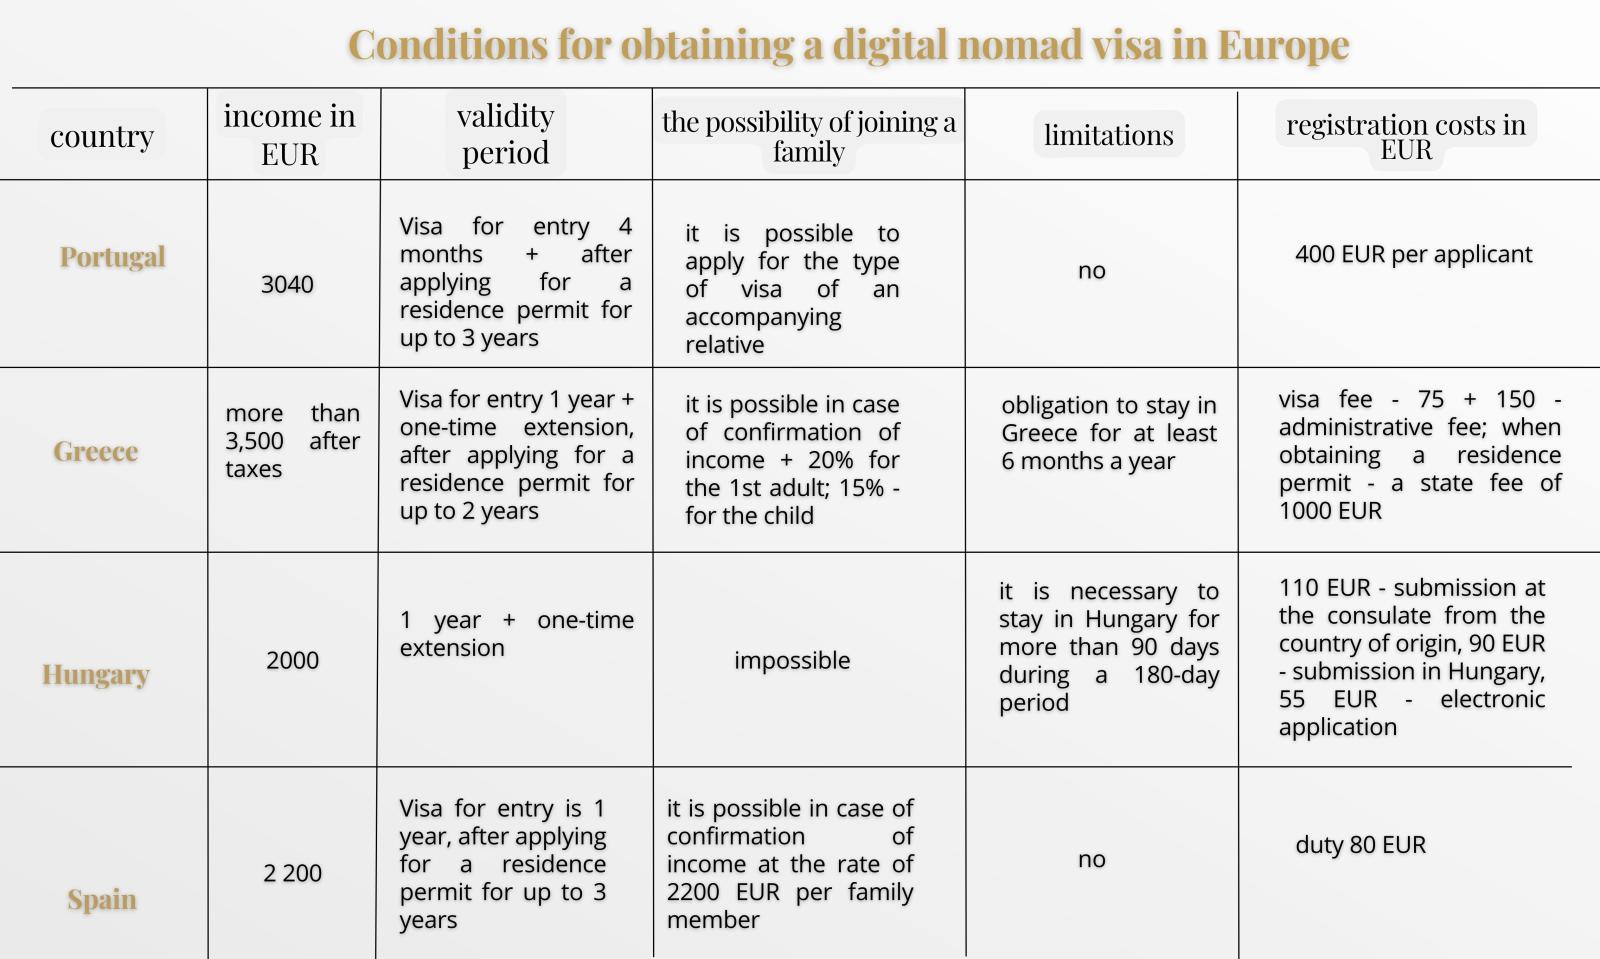 Table: conditions for obtaining a digital nomad visa in Europe